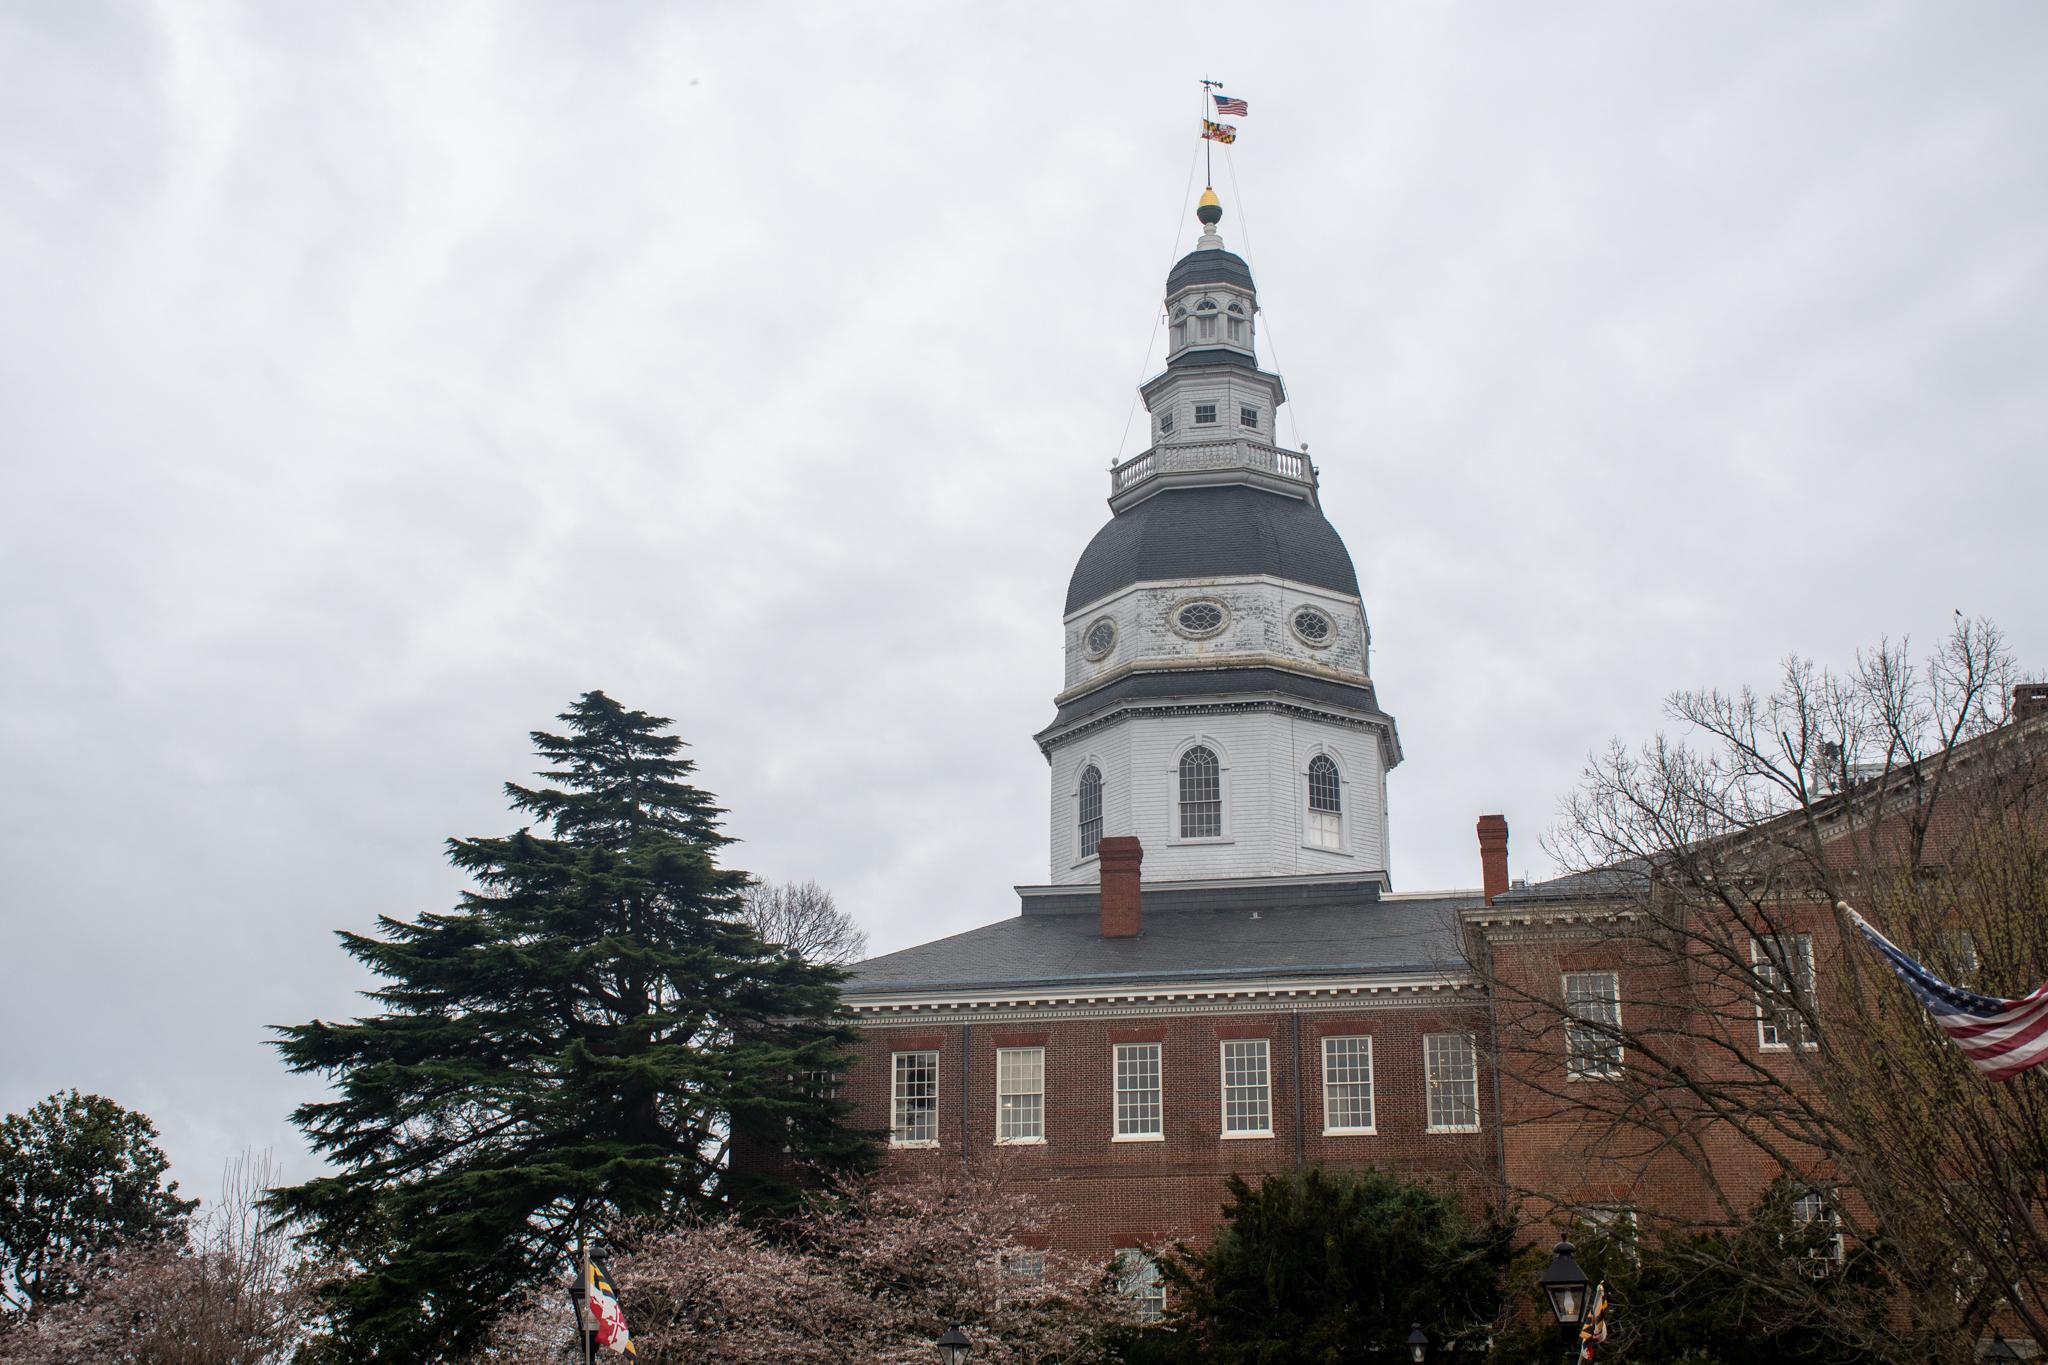 The Maryland State House in Annapolis on March 23, 2022. (Christine Zhu/Capital News Service)